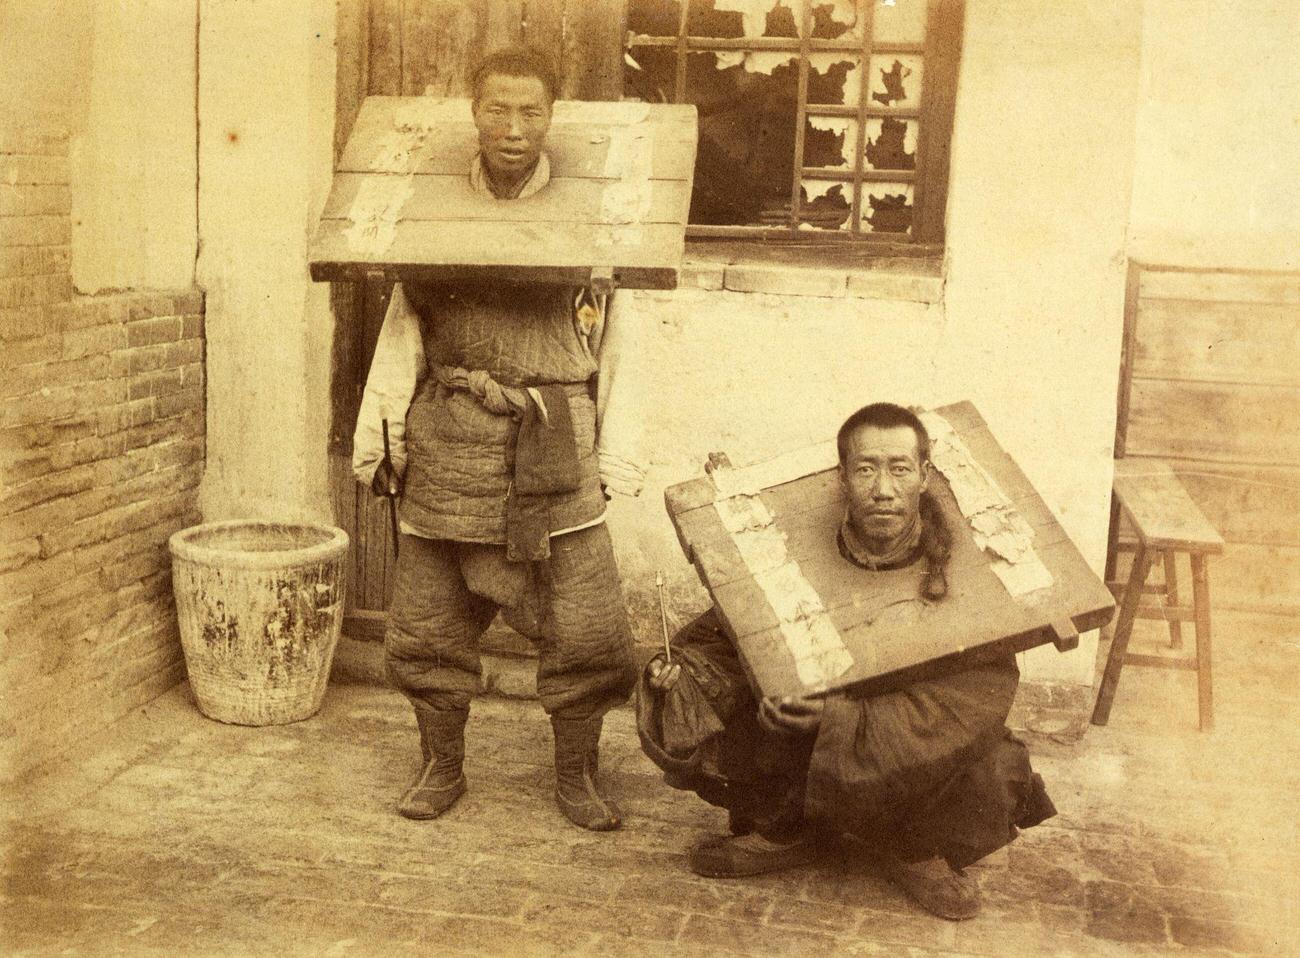 Chinese criminals restrained in wooden stocks.